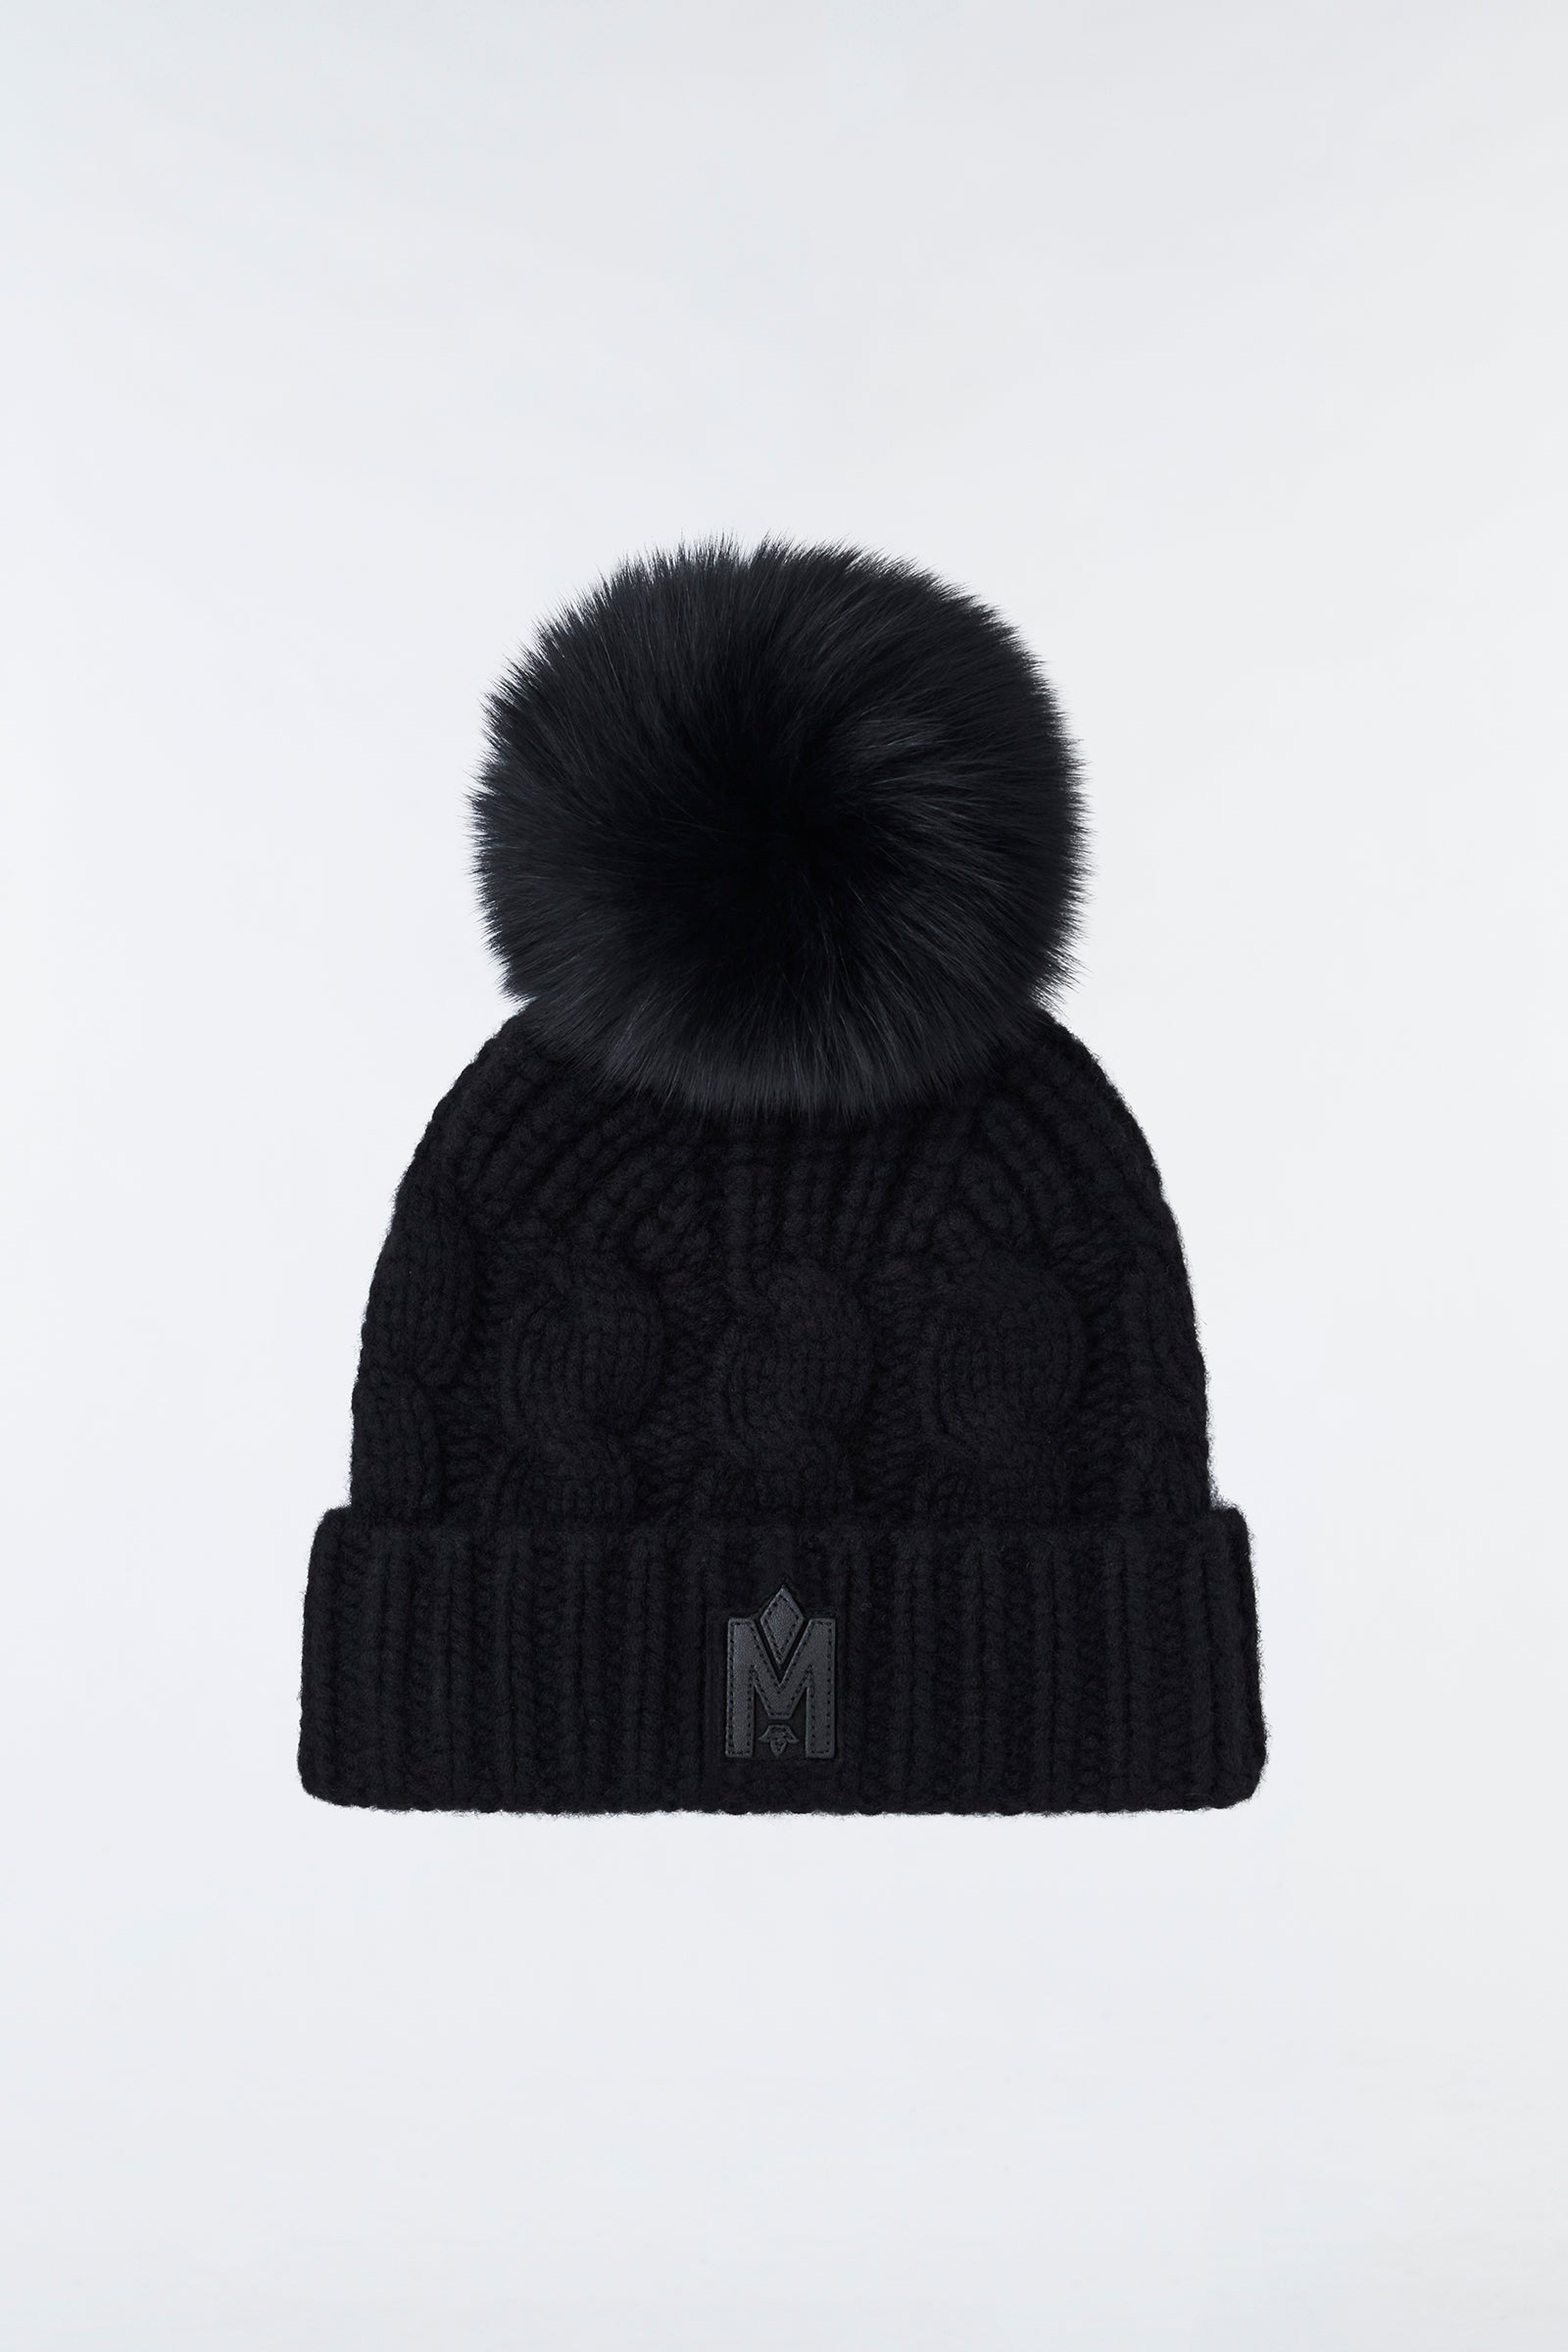 Mackage NINA Cashmere Cable Knit Toque in Black